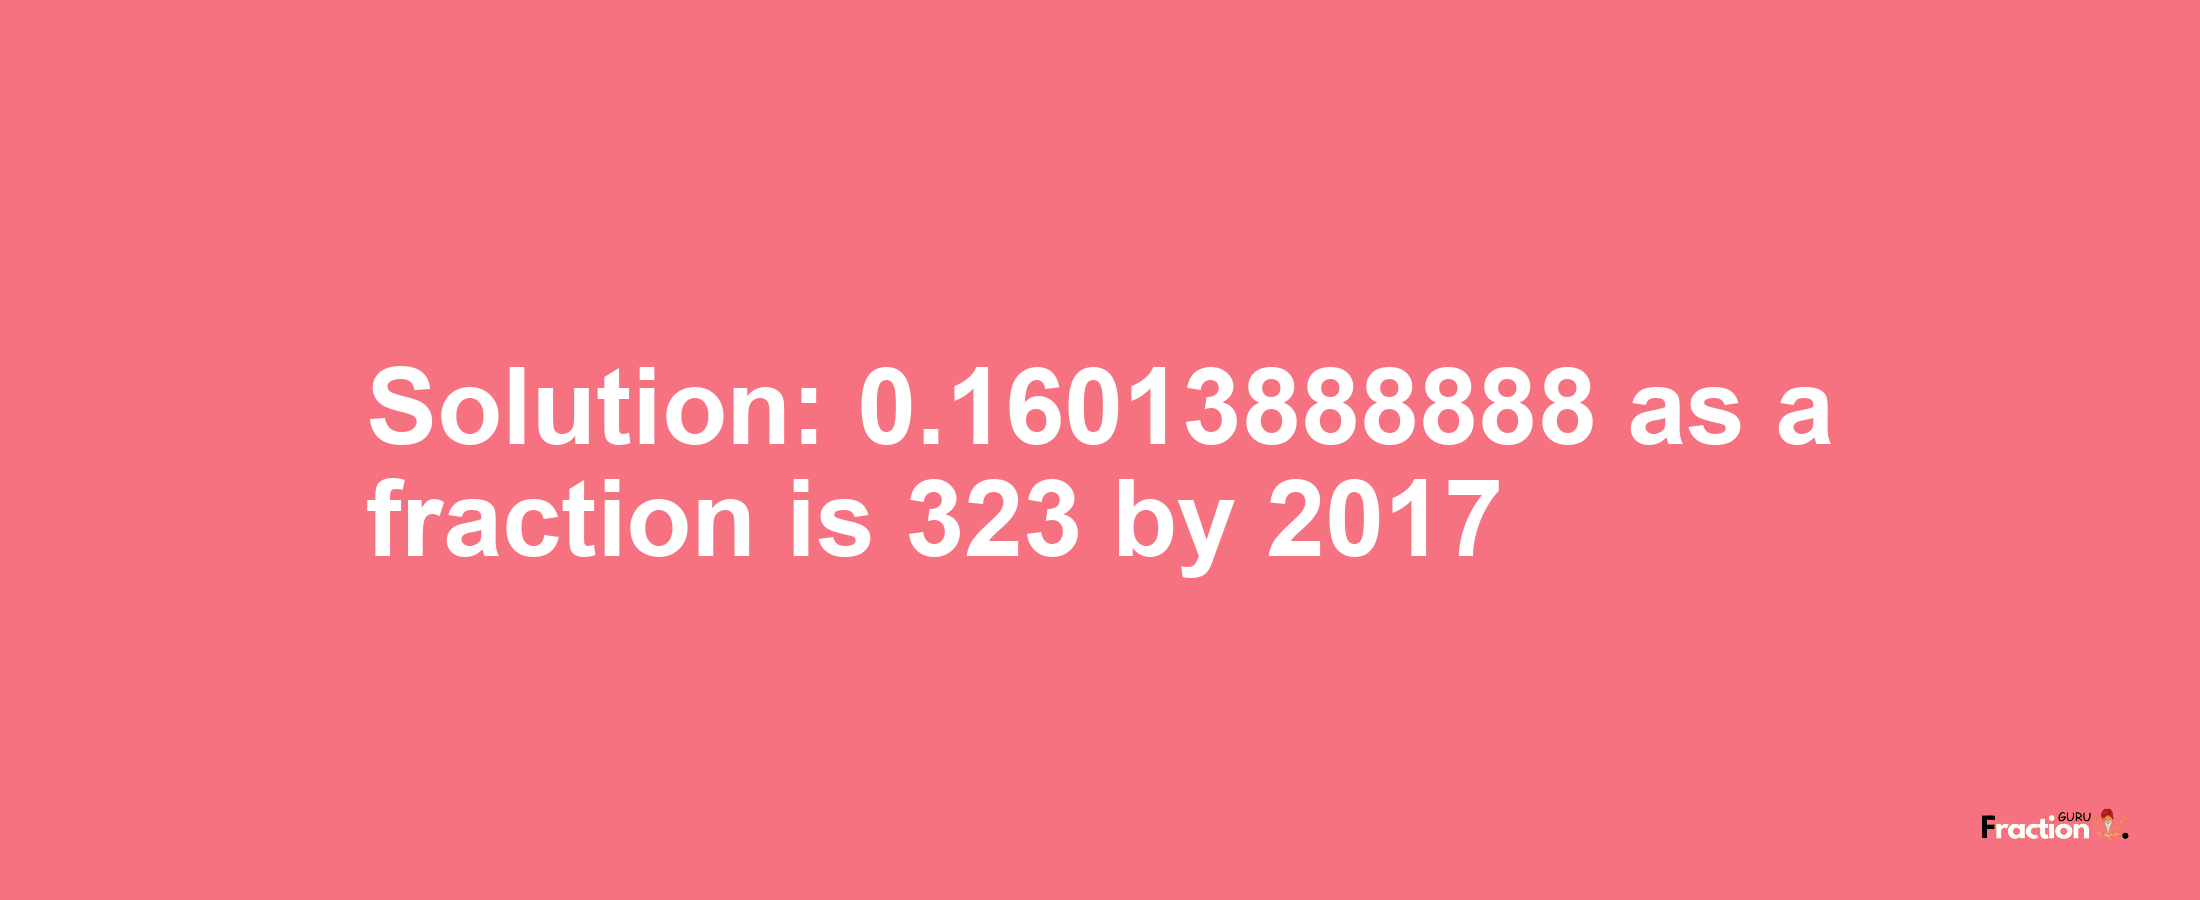 Solution:0.16013888888 as a fraction is 323/2017